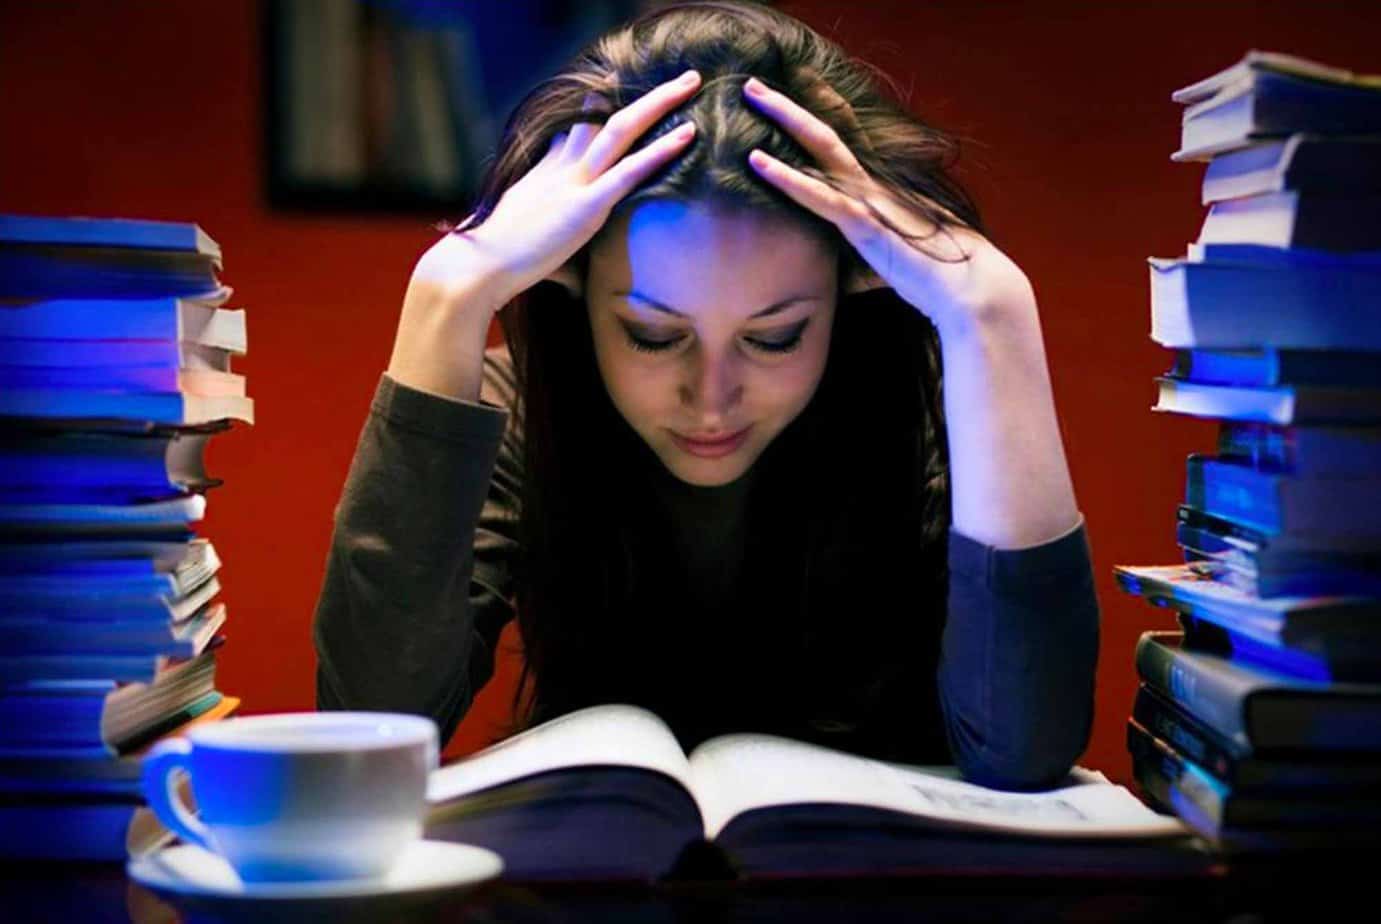 stressed woman with hands in her hair looking at book reading on desk with books piled by her with cup of coffee